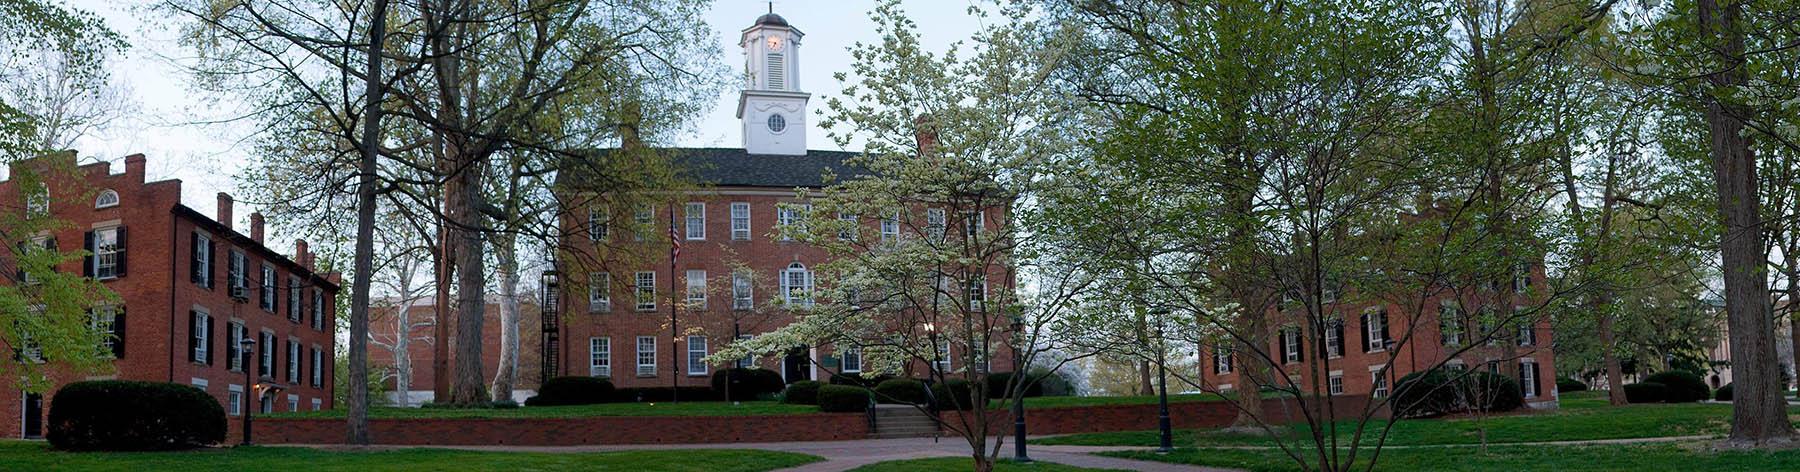 Panoramic image of brick buildings on College Green on the Athens Campus.